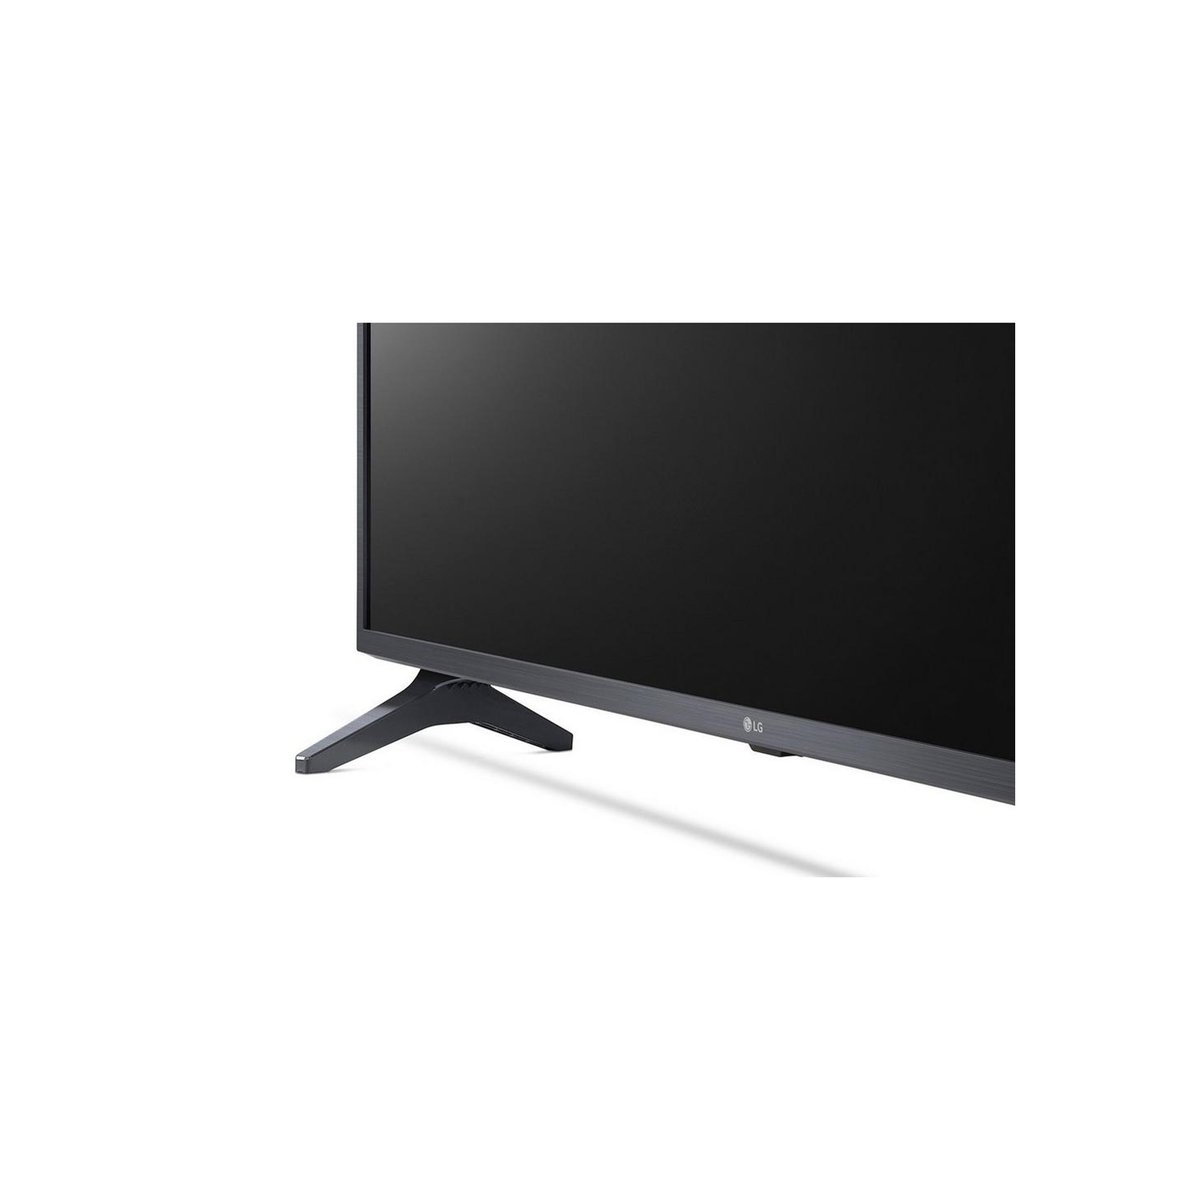 LG 4K UHD Smart TV 50UP7550PVG 50 inches